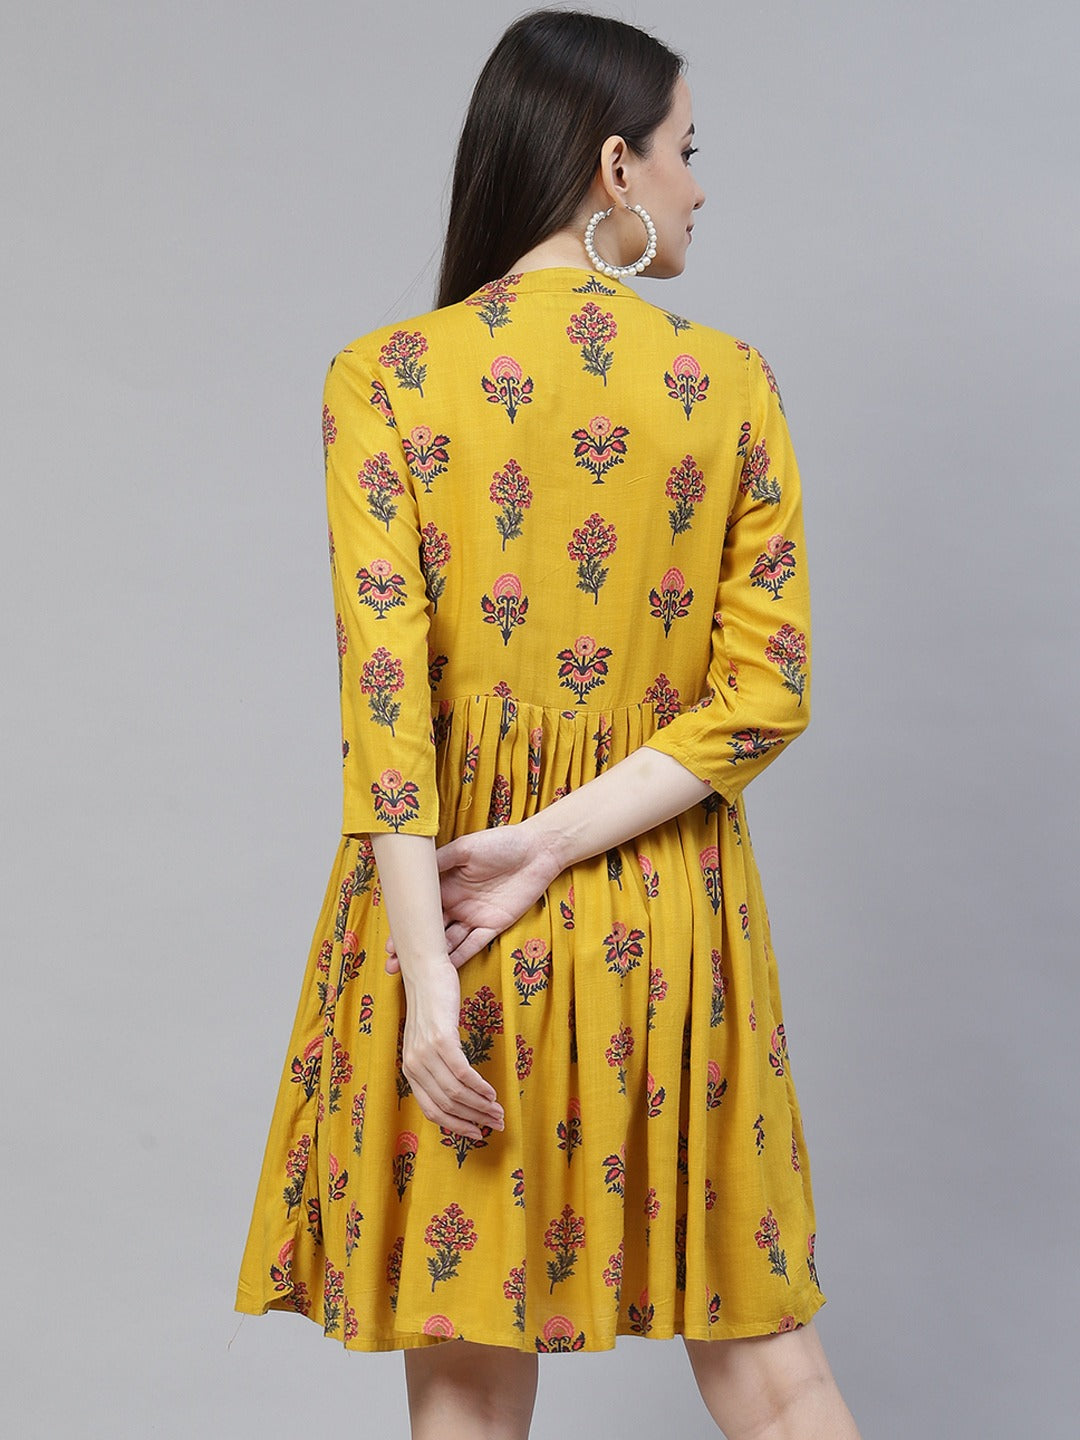 Women's mustard yellow and pink floral printed flared short dress - Meeranshi